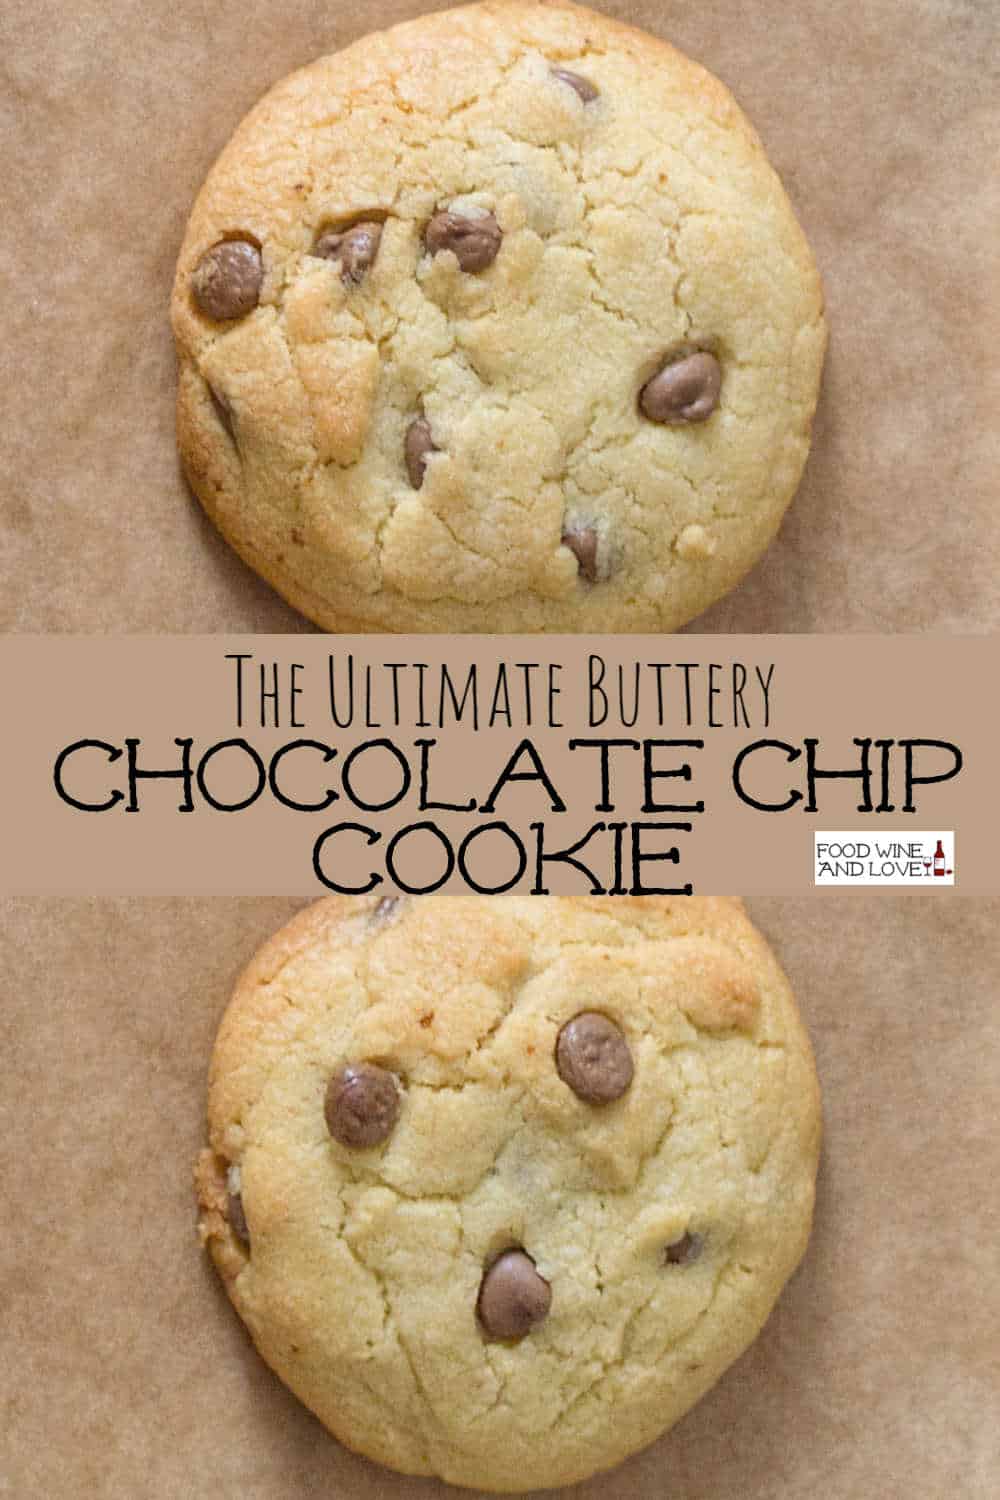  The Ultimate Buttery Chocolate Chip Cookie